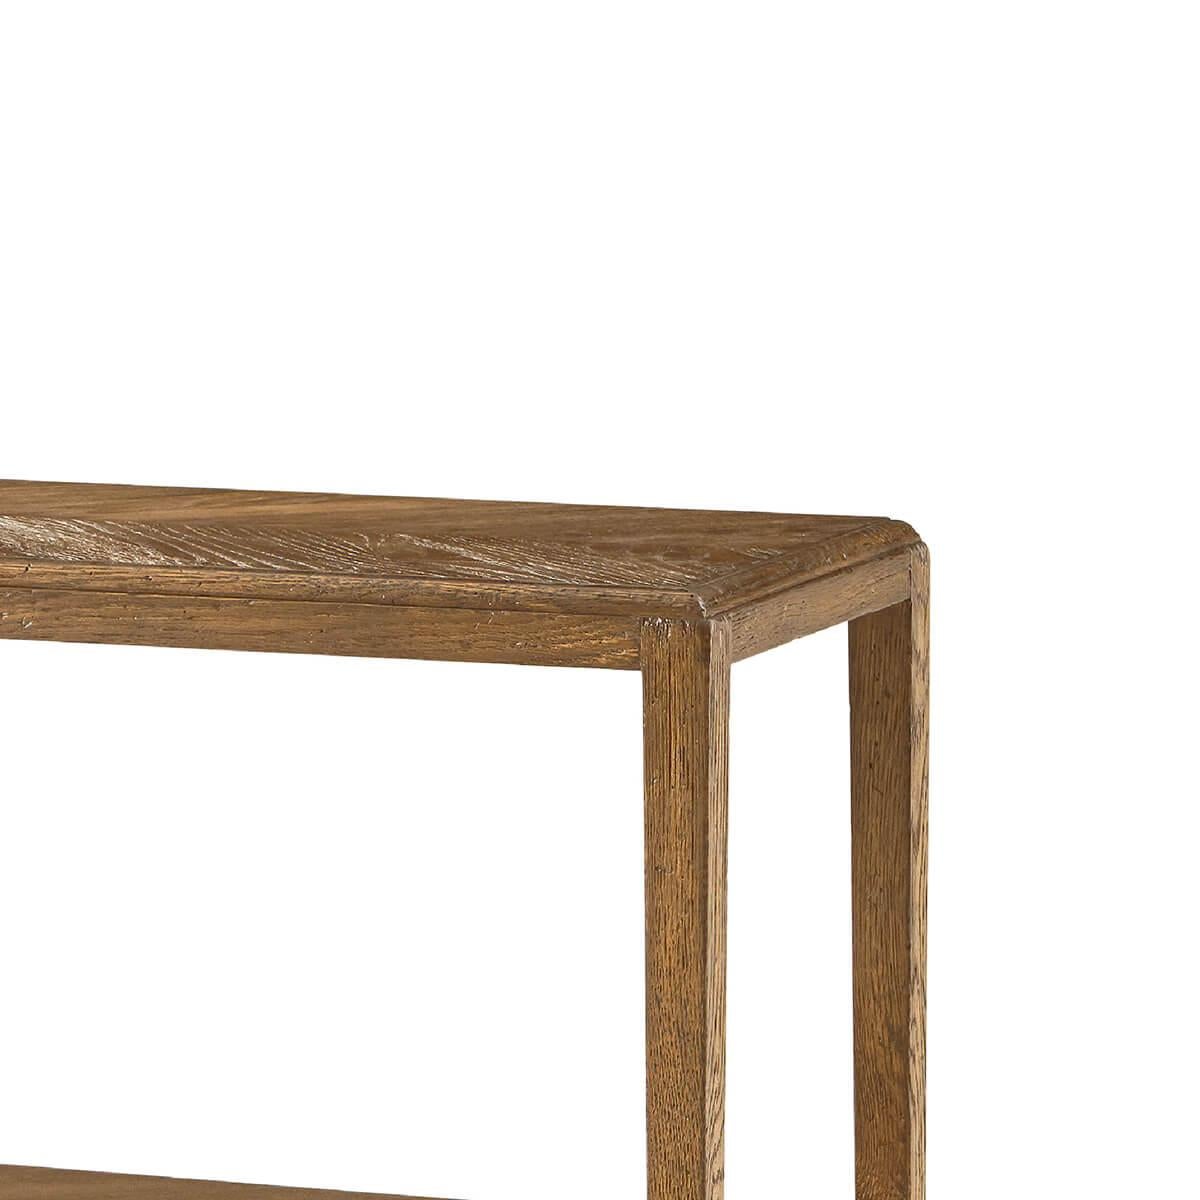 A Neo-Classic style oak three-tier console table with a rectangular mirrored herringbone-patterned oak top and shelves in Dawn finish raised on six tapered oak legs.

Dimensions: 47.5